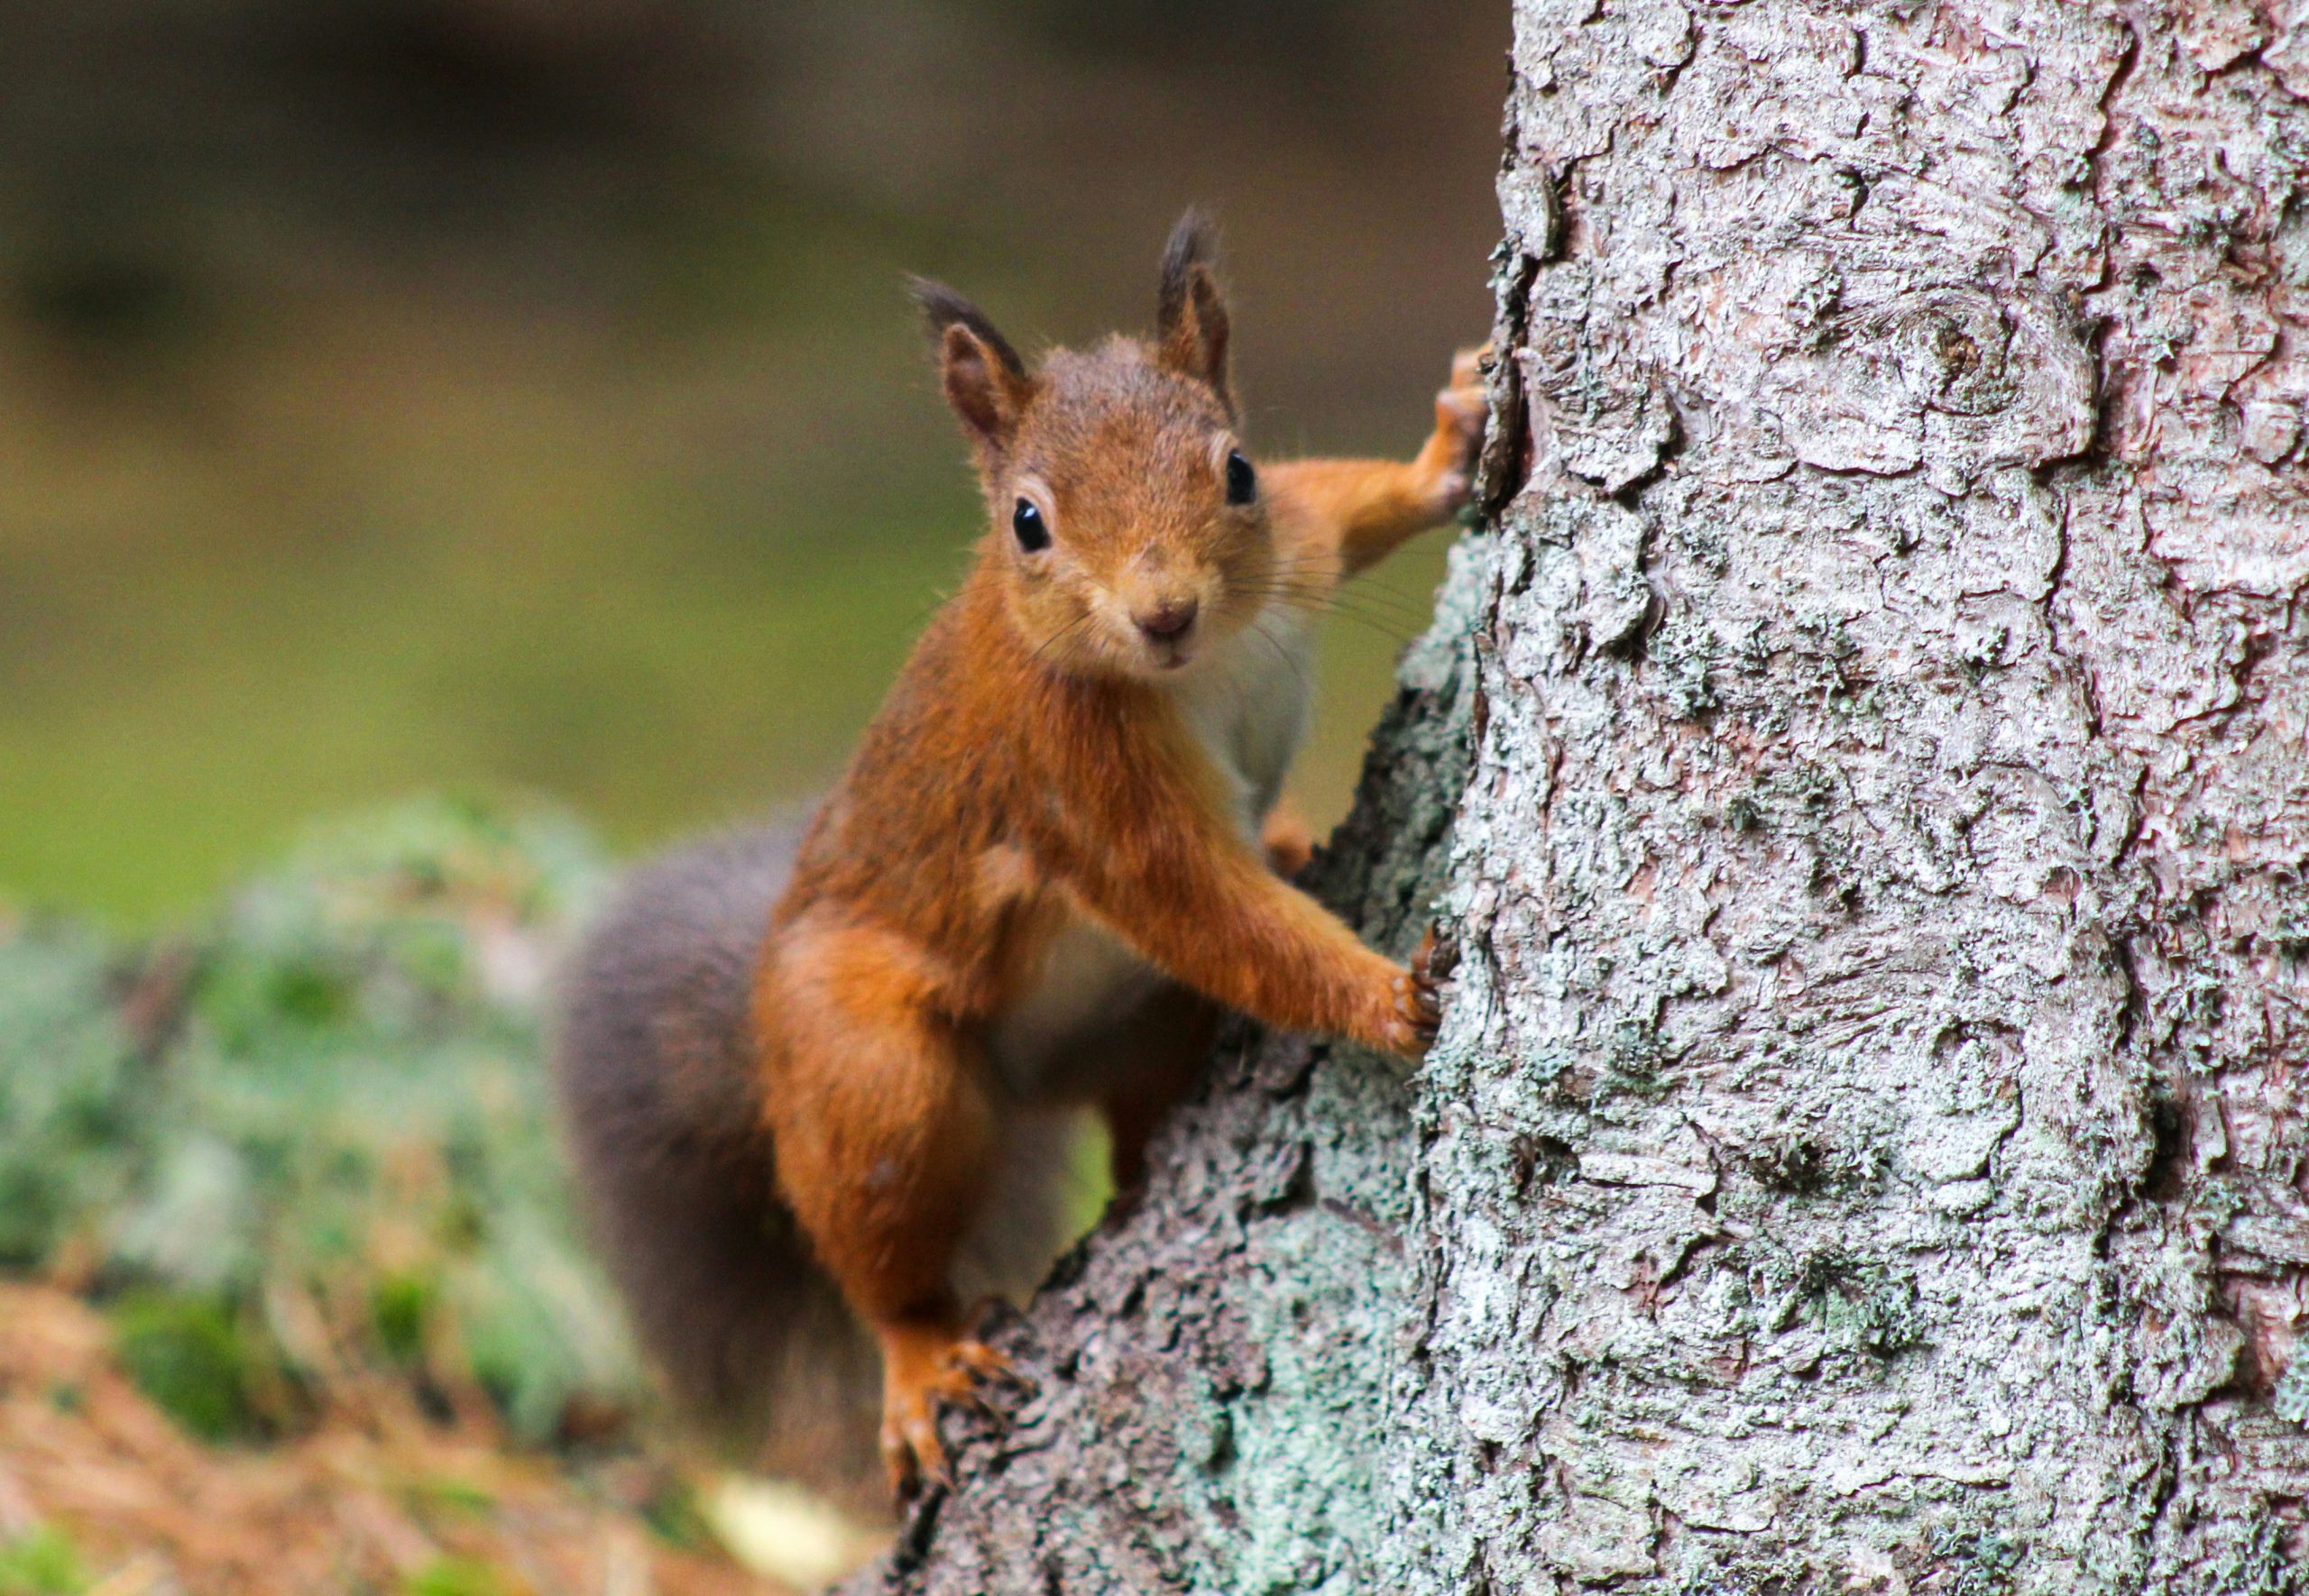 Squirrels were carriers of leprosy in the Middle Ages.